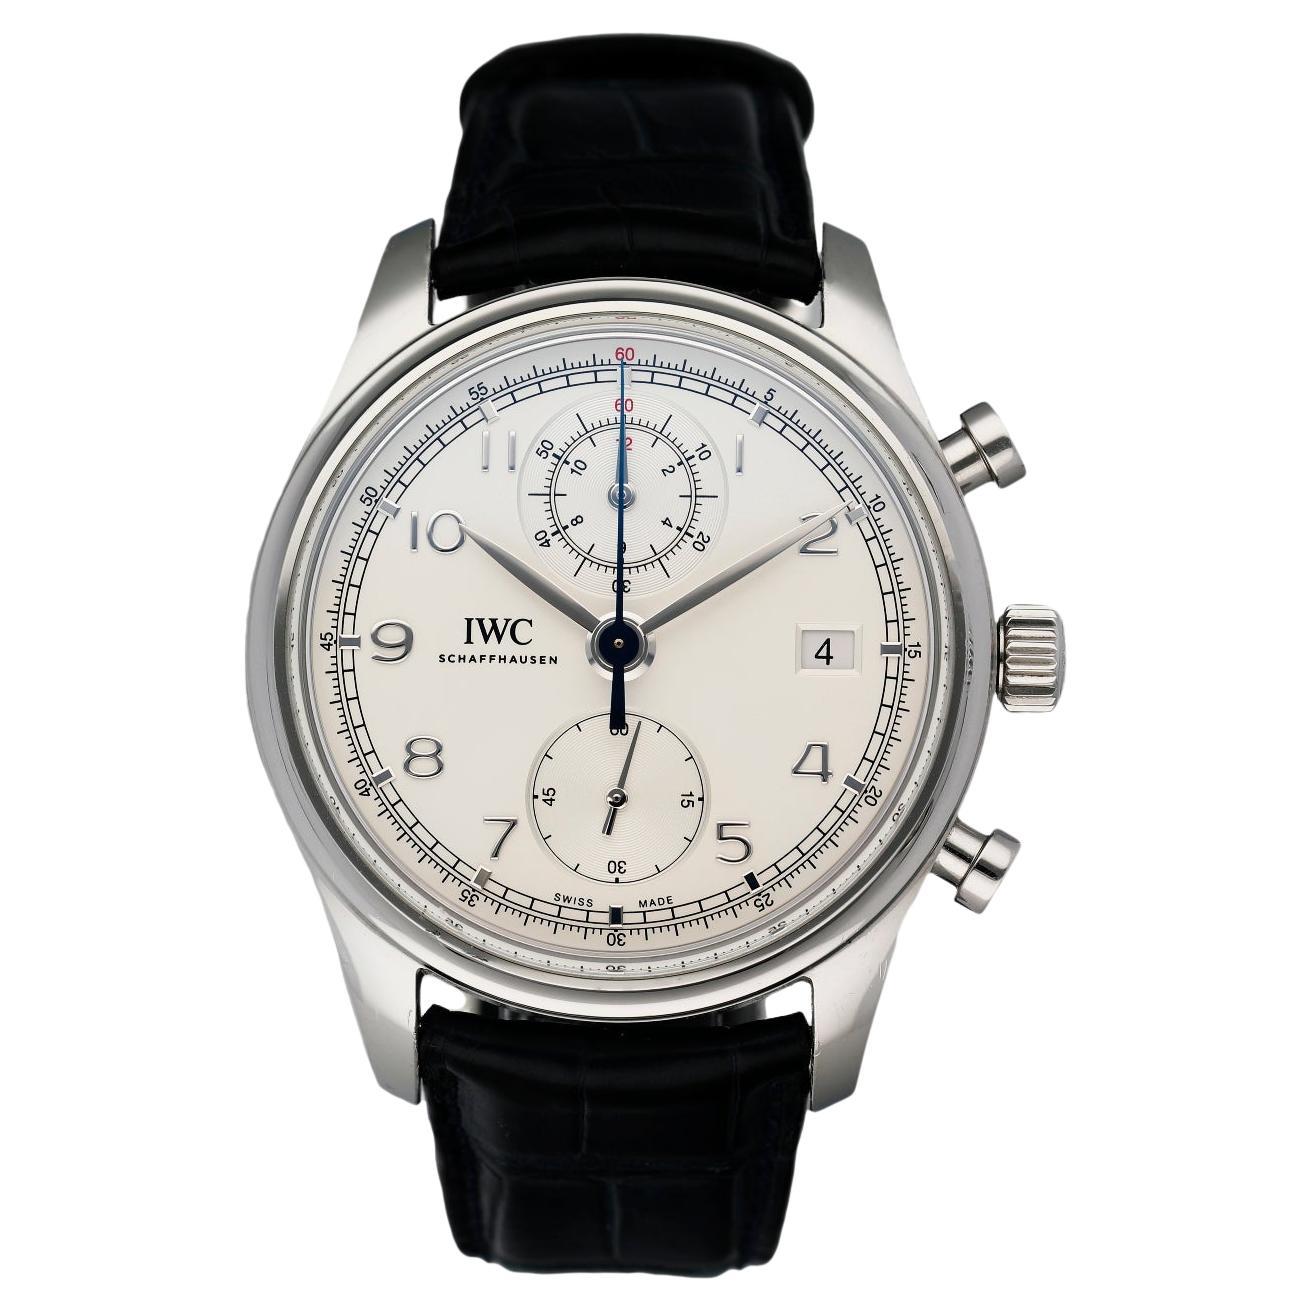 IWC Portugieser Chronograph Classic IW390403 Mens Watch Box Papers